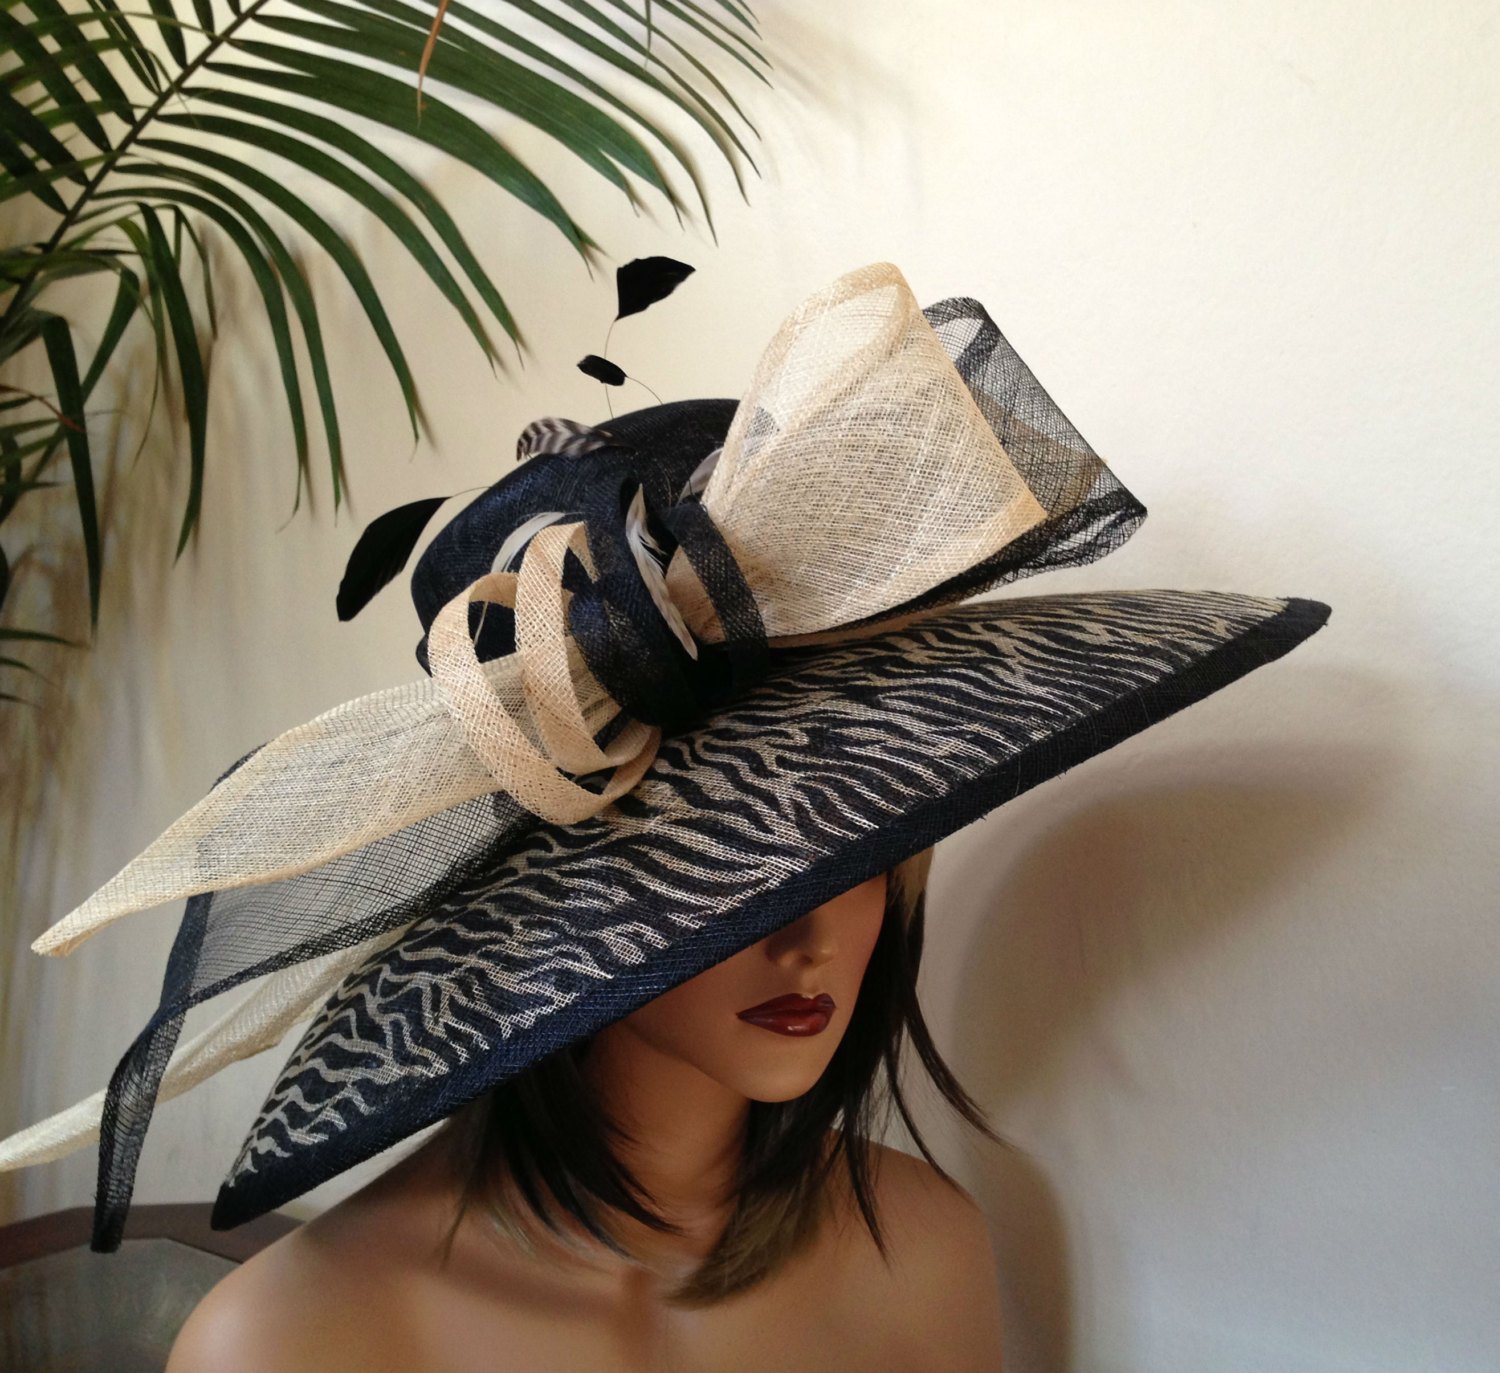 Kentucky Derby  hat. Derby Hat. Del Mar hat.  Formal hat. Black hat for Royal Ascot,  Couture hat, wedding, Ascot